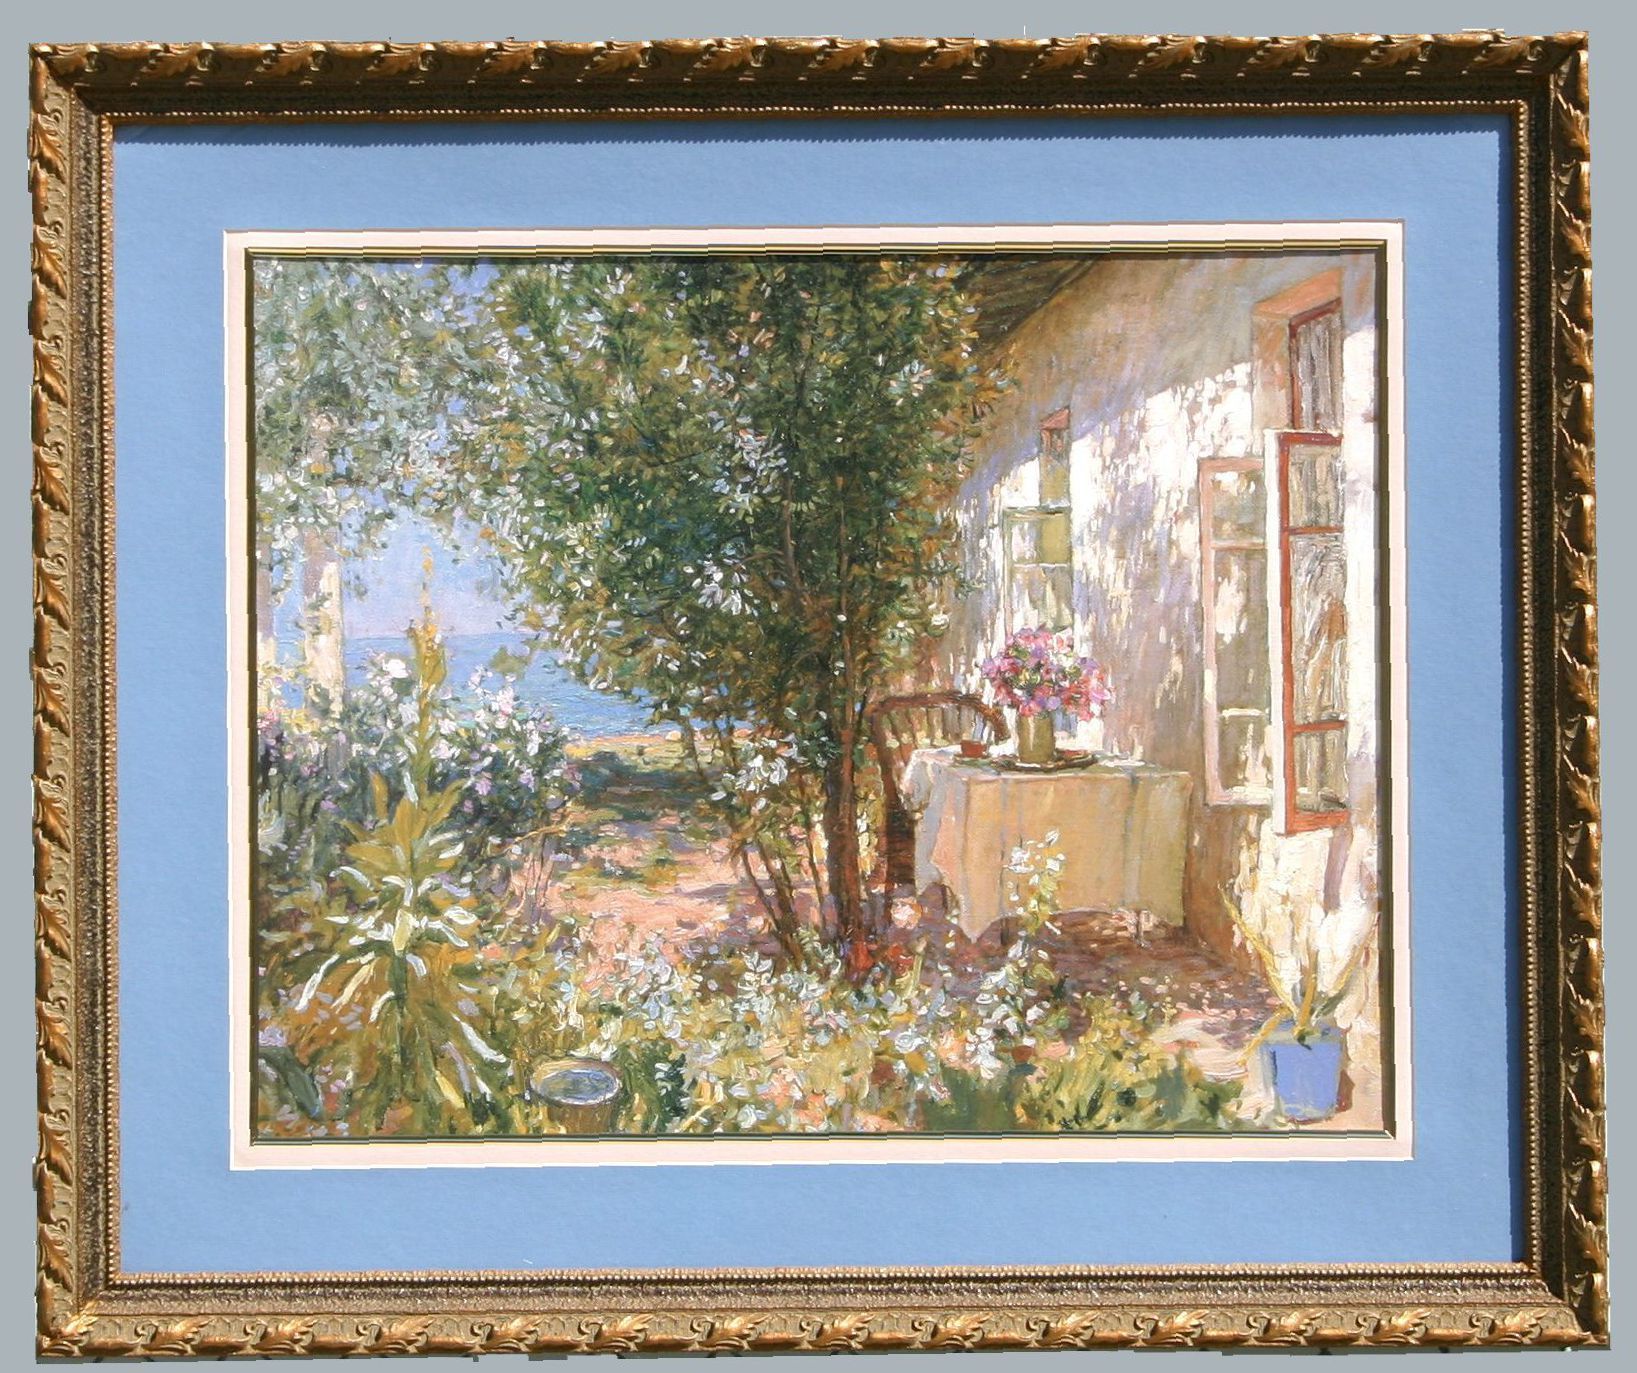 Art Print Title "a Shaded Corner Of The Garden" With Regard To Landscape Framed Art Prints (View 2 of 15)